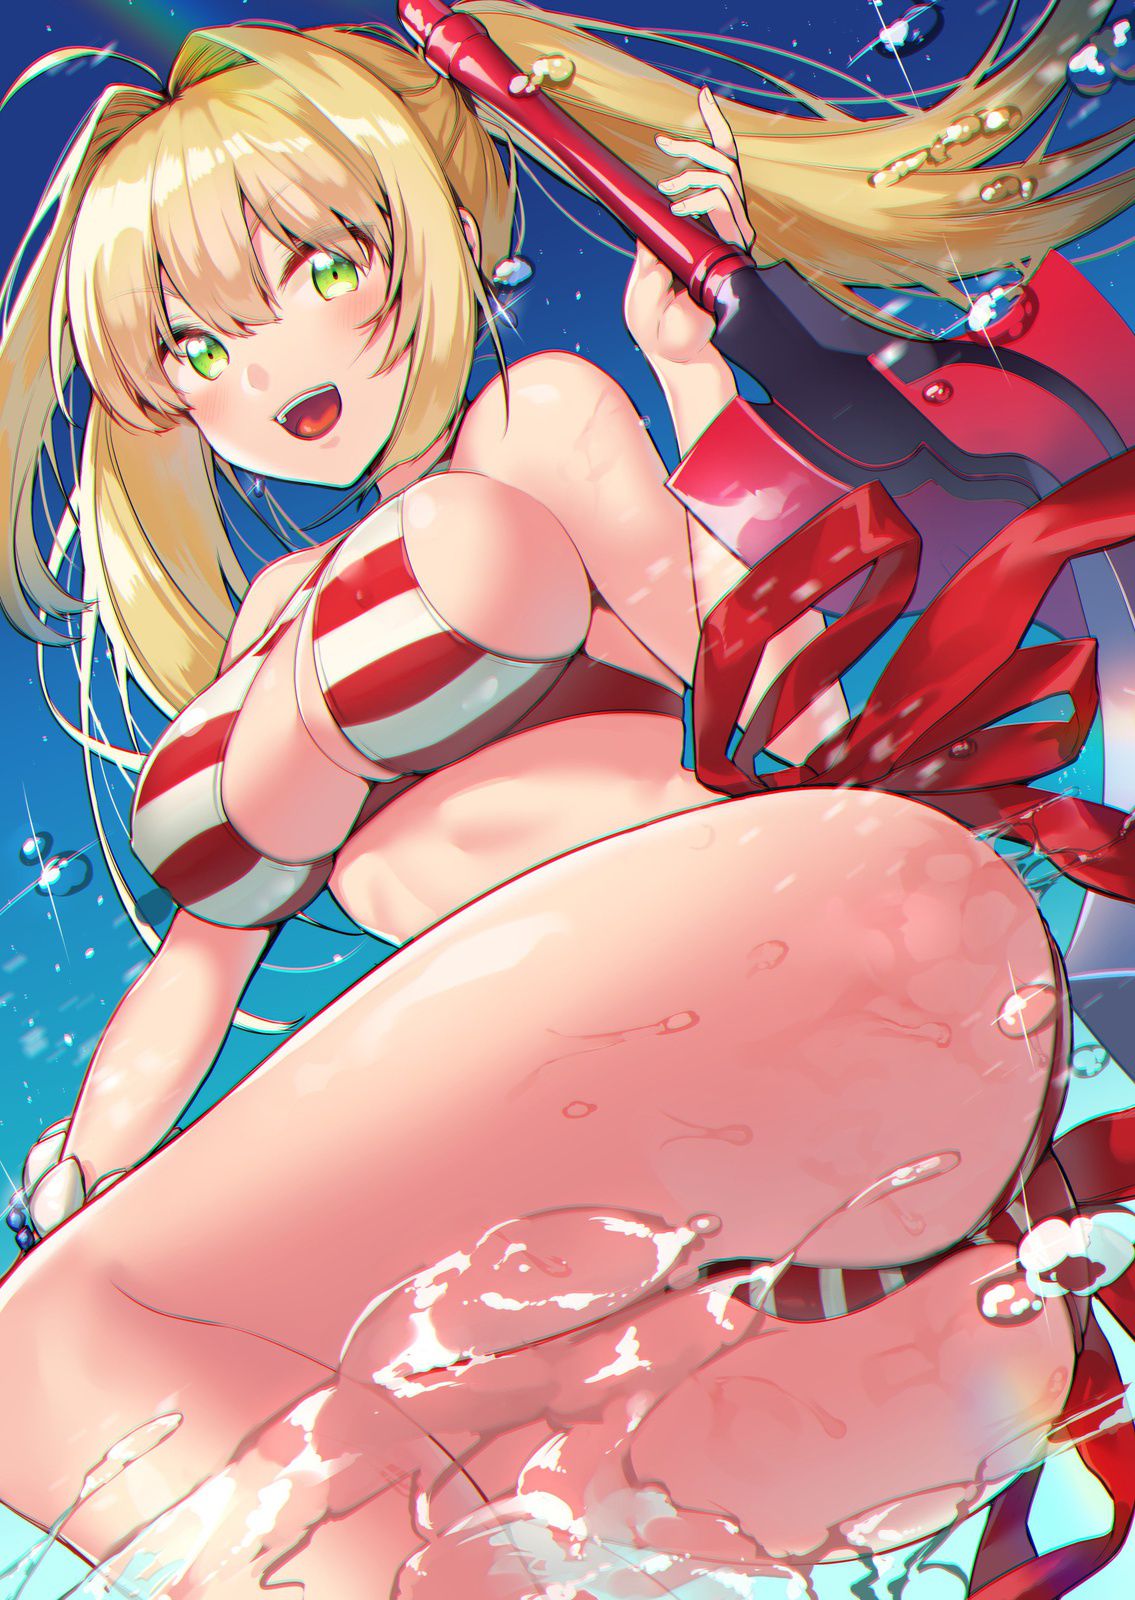 [Secondary erotic] Click here for a summary of erotic images of Nero Claudius in the Fate series 18